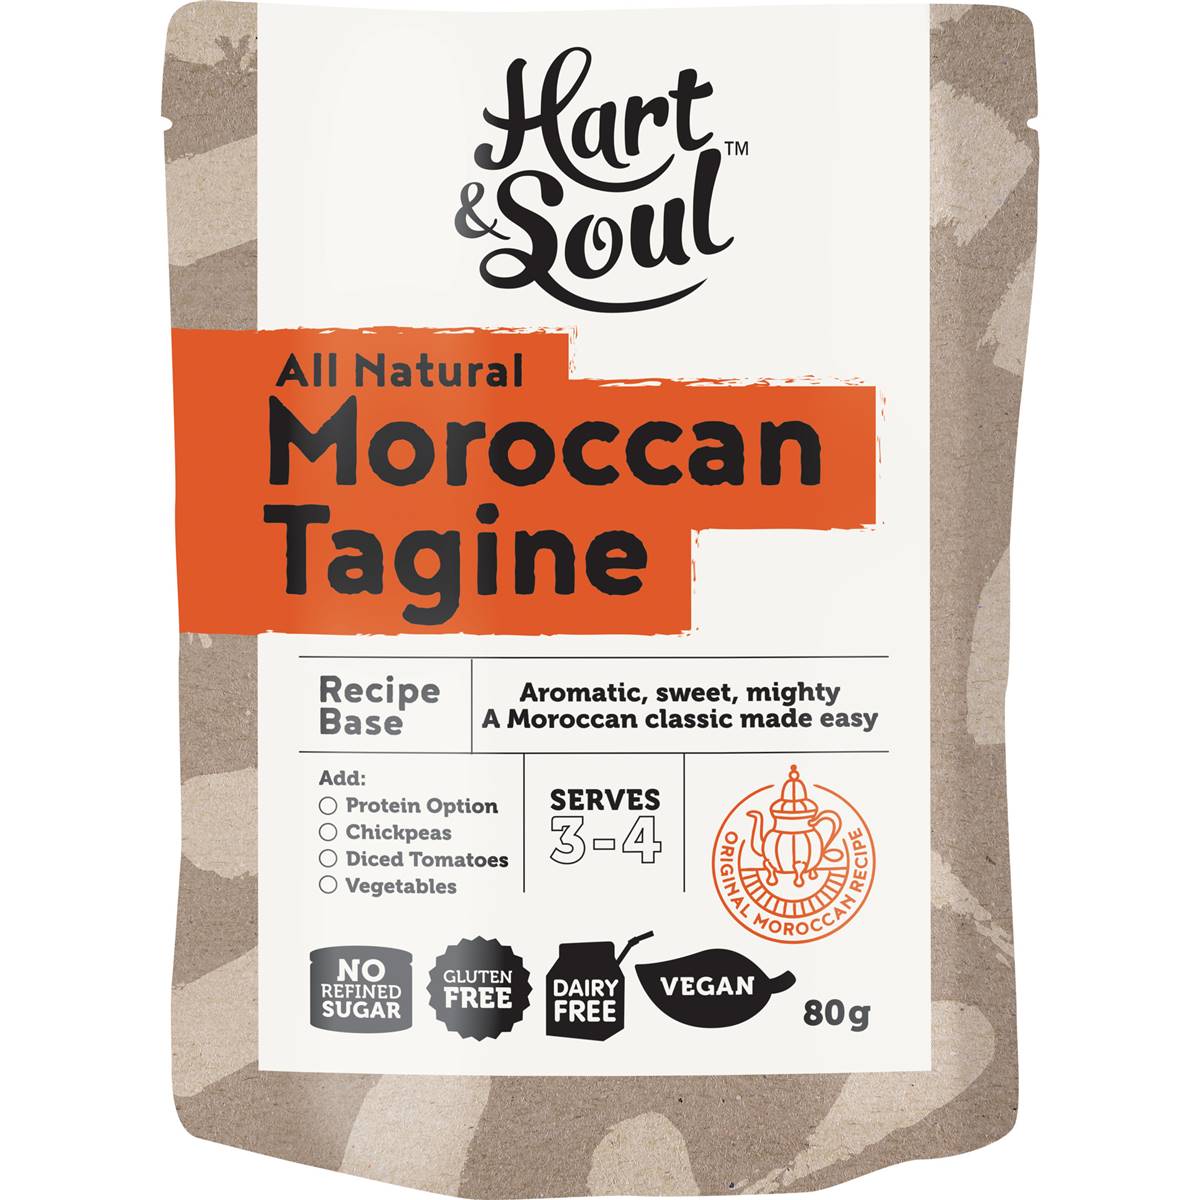 Calories in Hart & Soul All Natural Moroccan Tagine Recipe Base